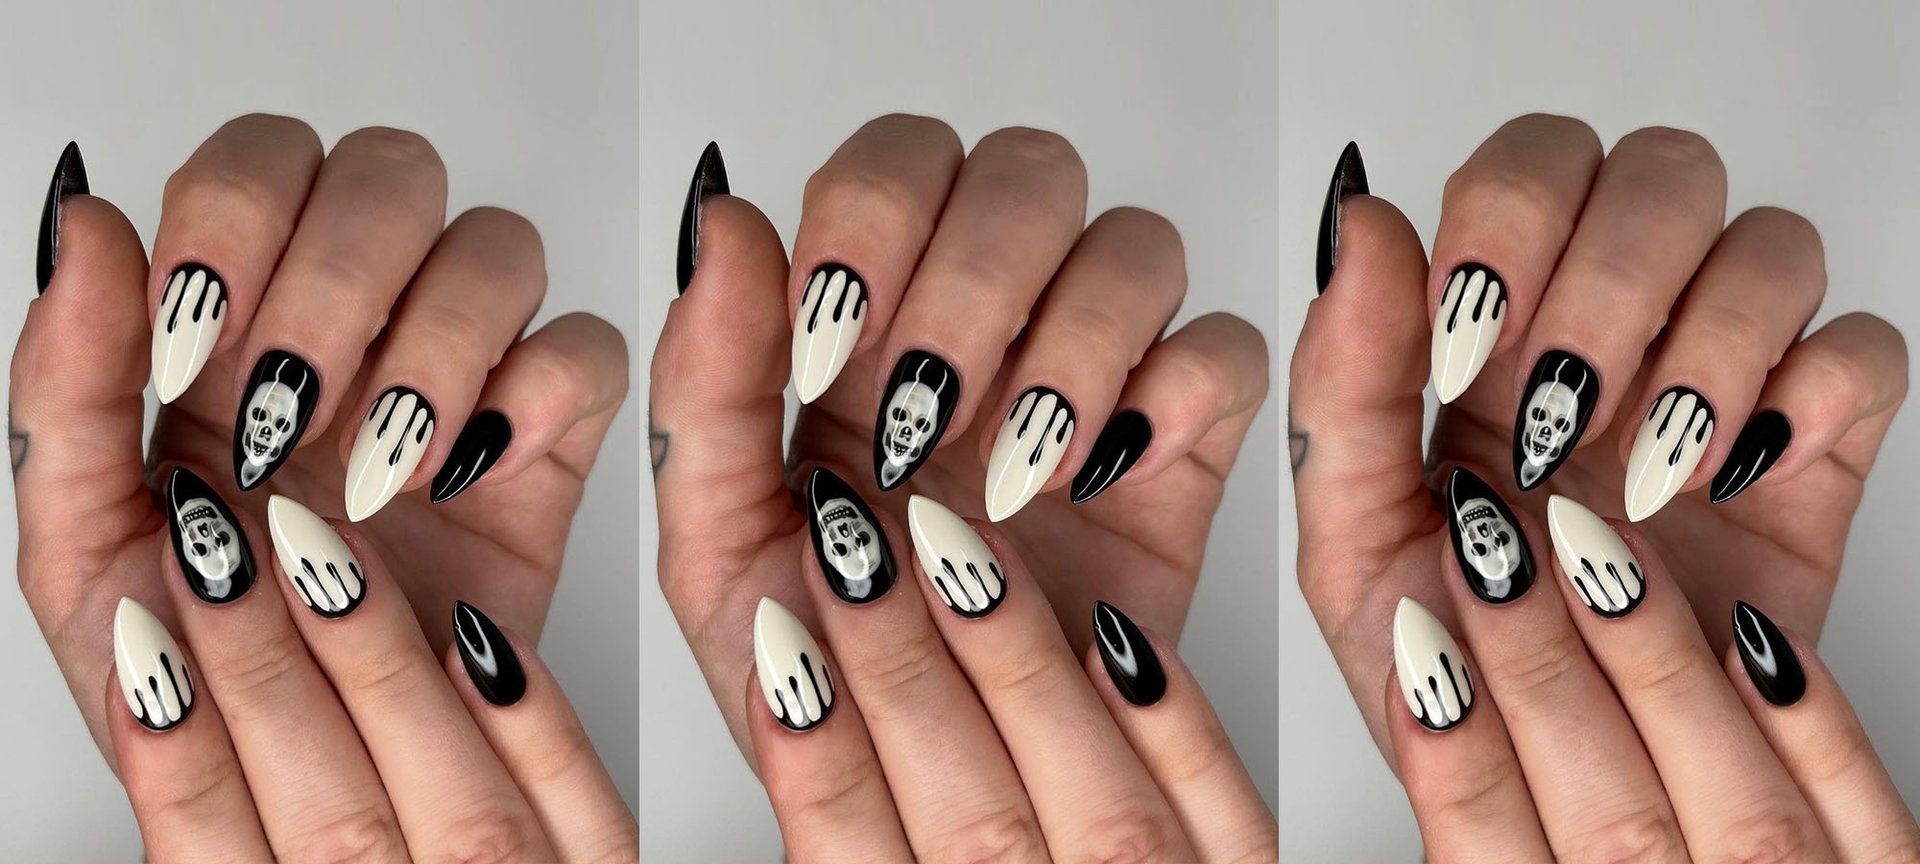 Religion Themed Nail Art - wide 9